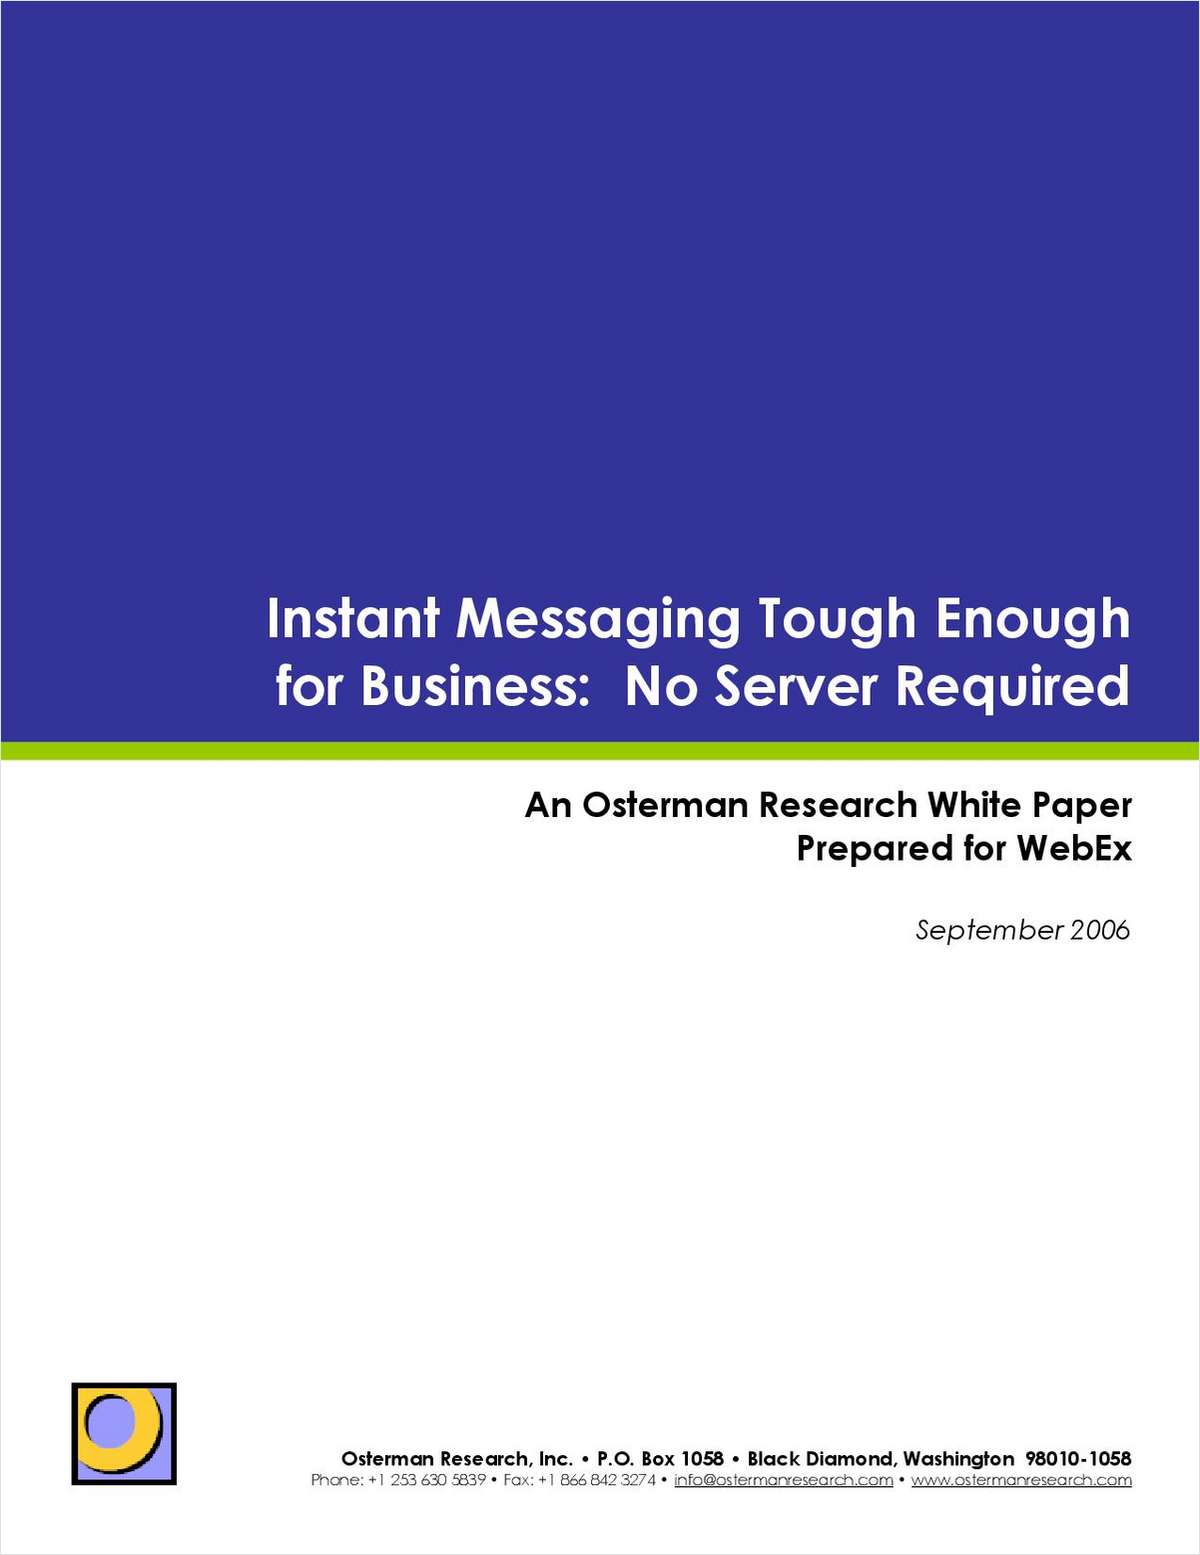 Instant Messaging Tough Enough for Business: No Server Required